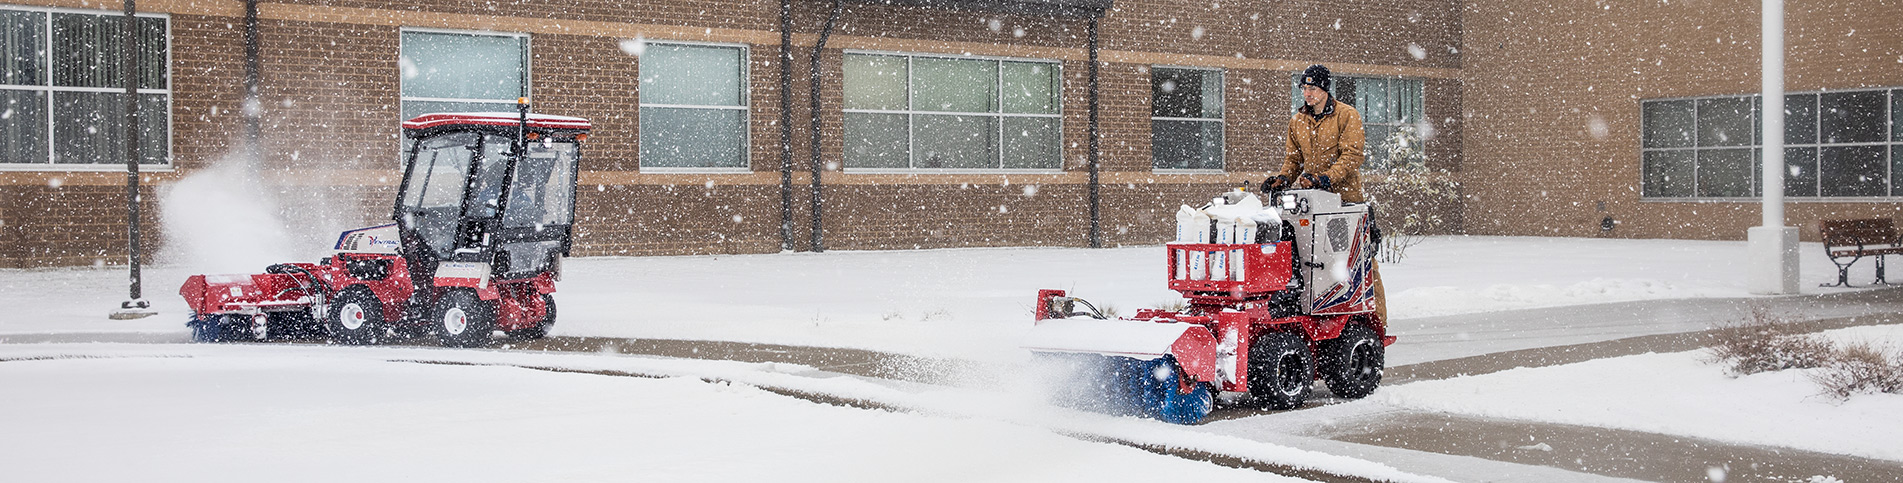 THE BEST SNOW REMOVAL MACHINES & Tools In Action! 